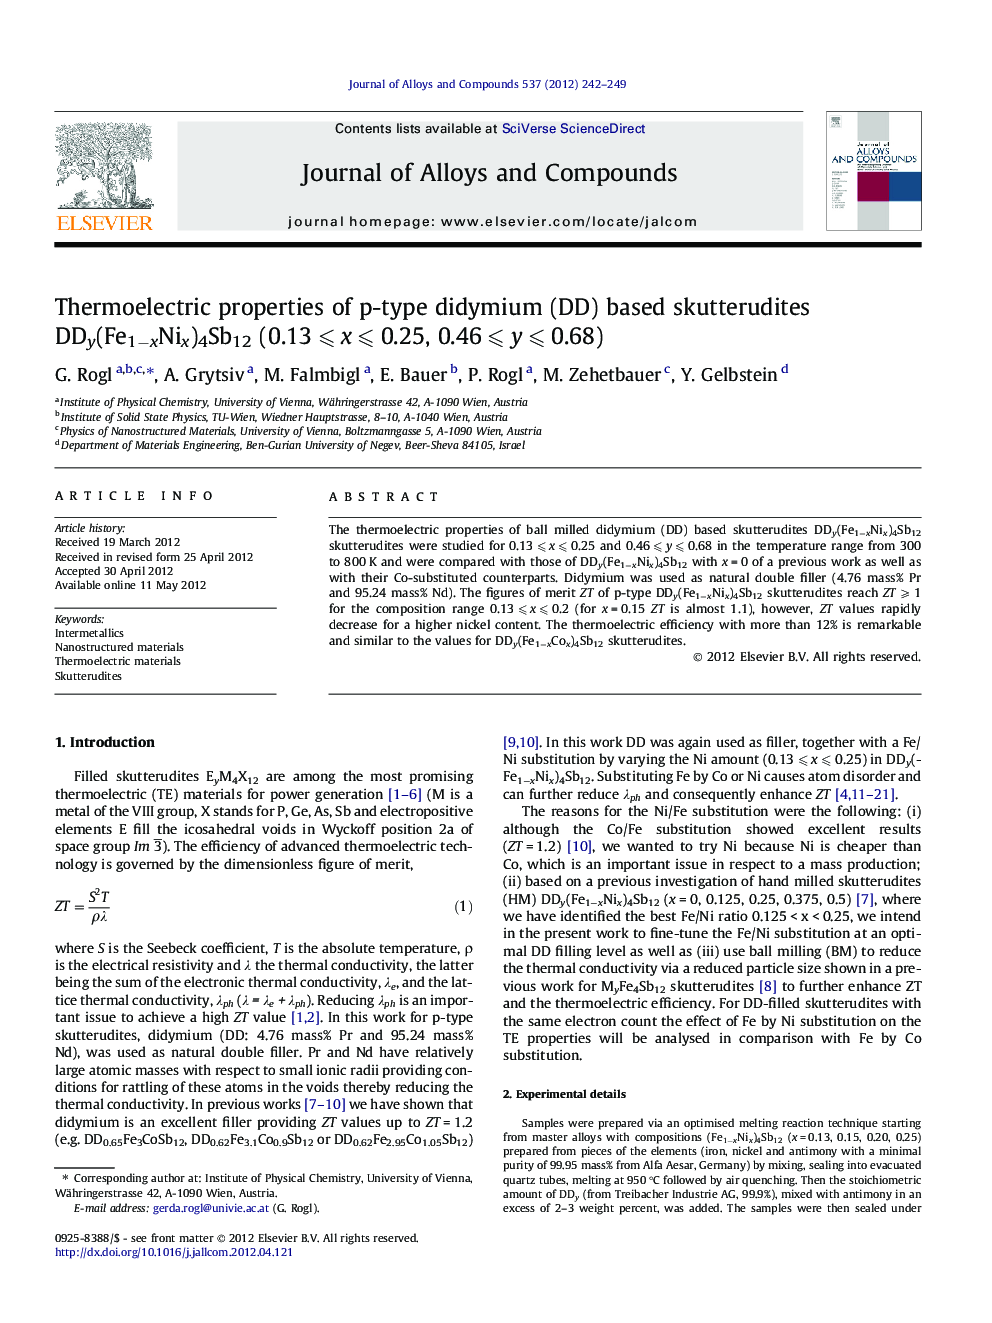 Thermoelectric properties of p-type didymium (DD) based skutterudites DDy(Fe1−xNix)4Sb12 (0.13 ⩽ x ⩽ 0.25, 0.46 ⩽ y ⩽ 0.68)